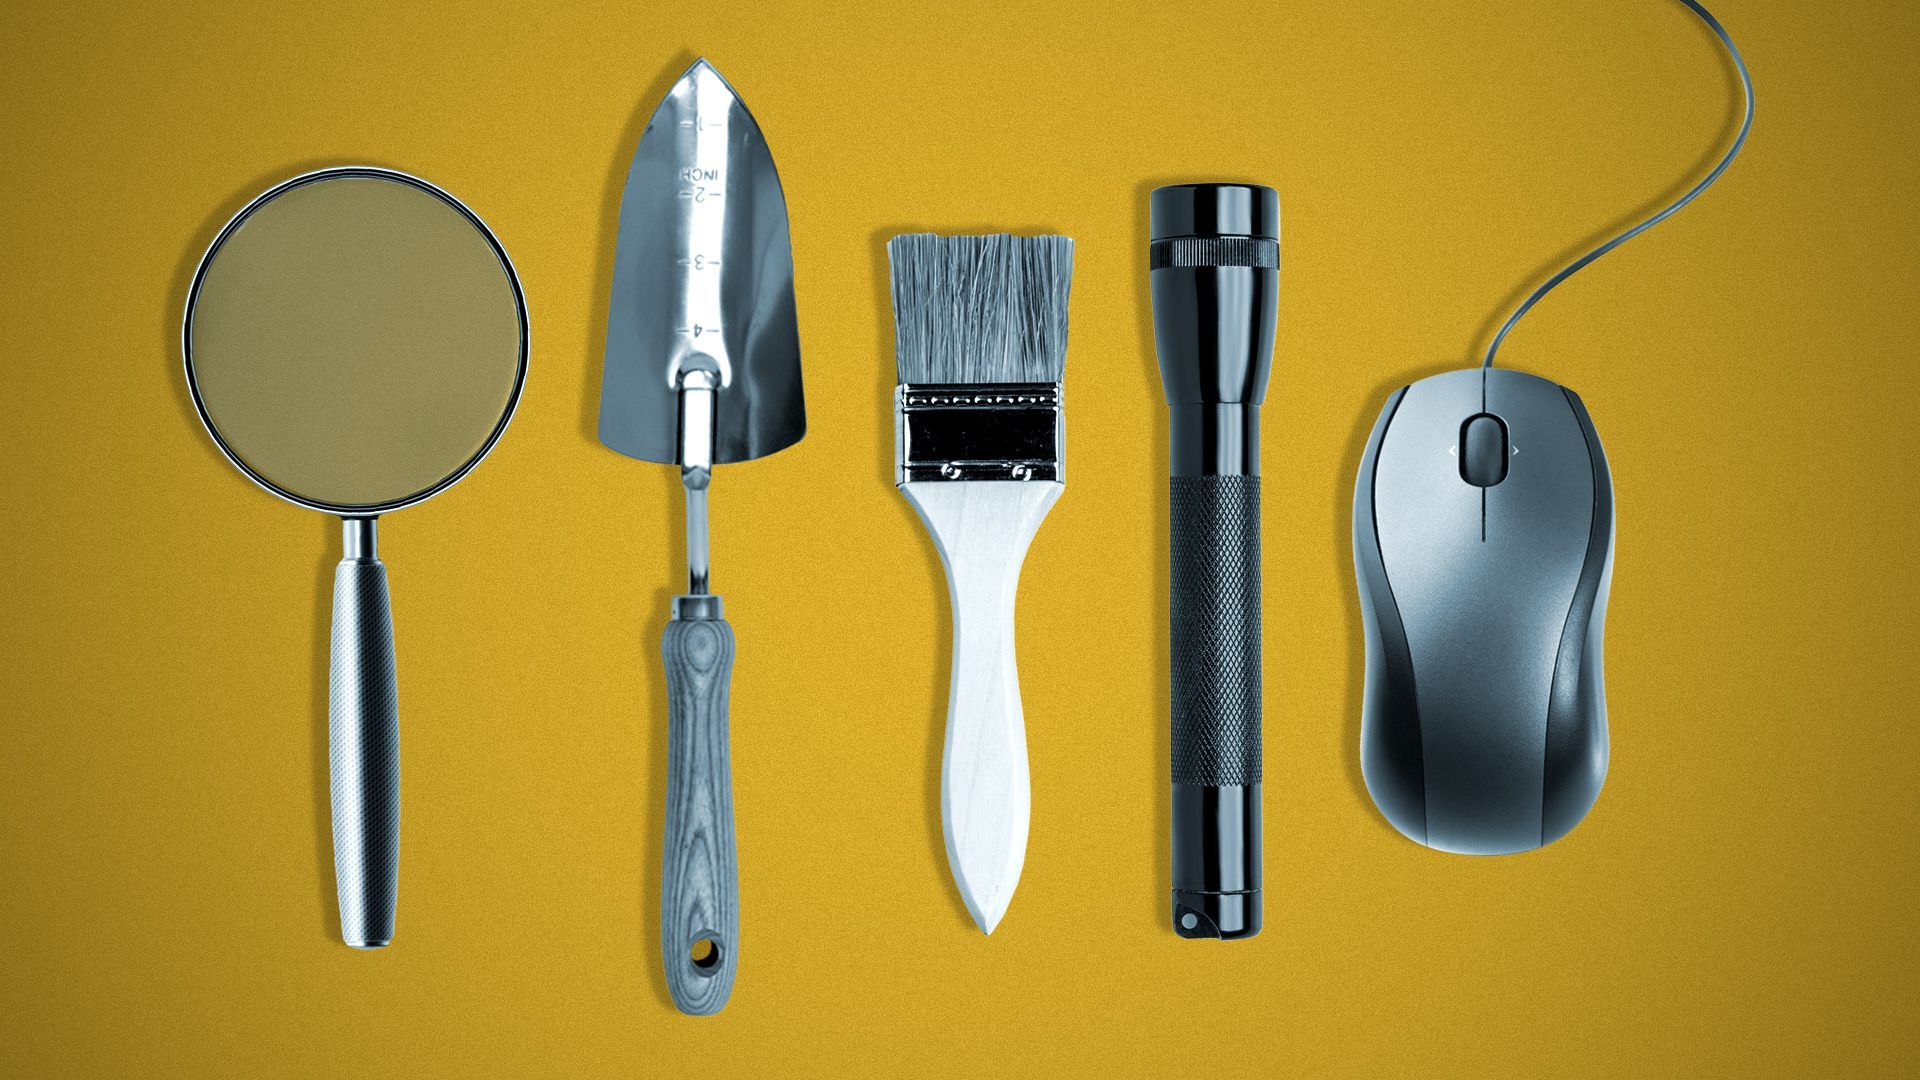  Illustration of a magnifying glass, trowel, brush, flashlight and computer mouse.